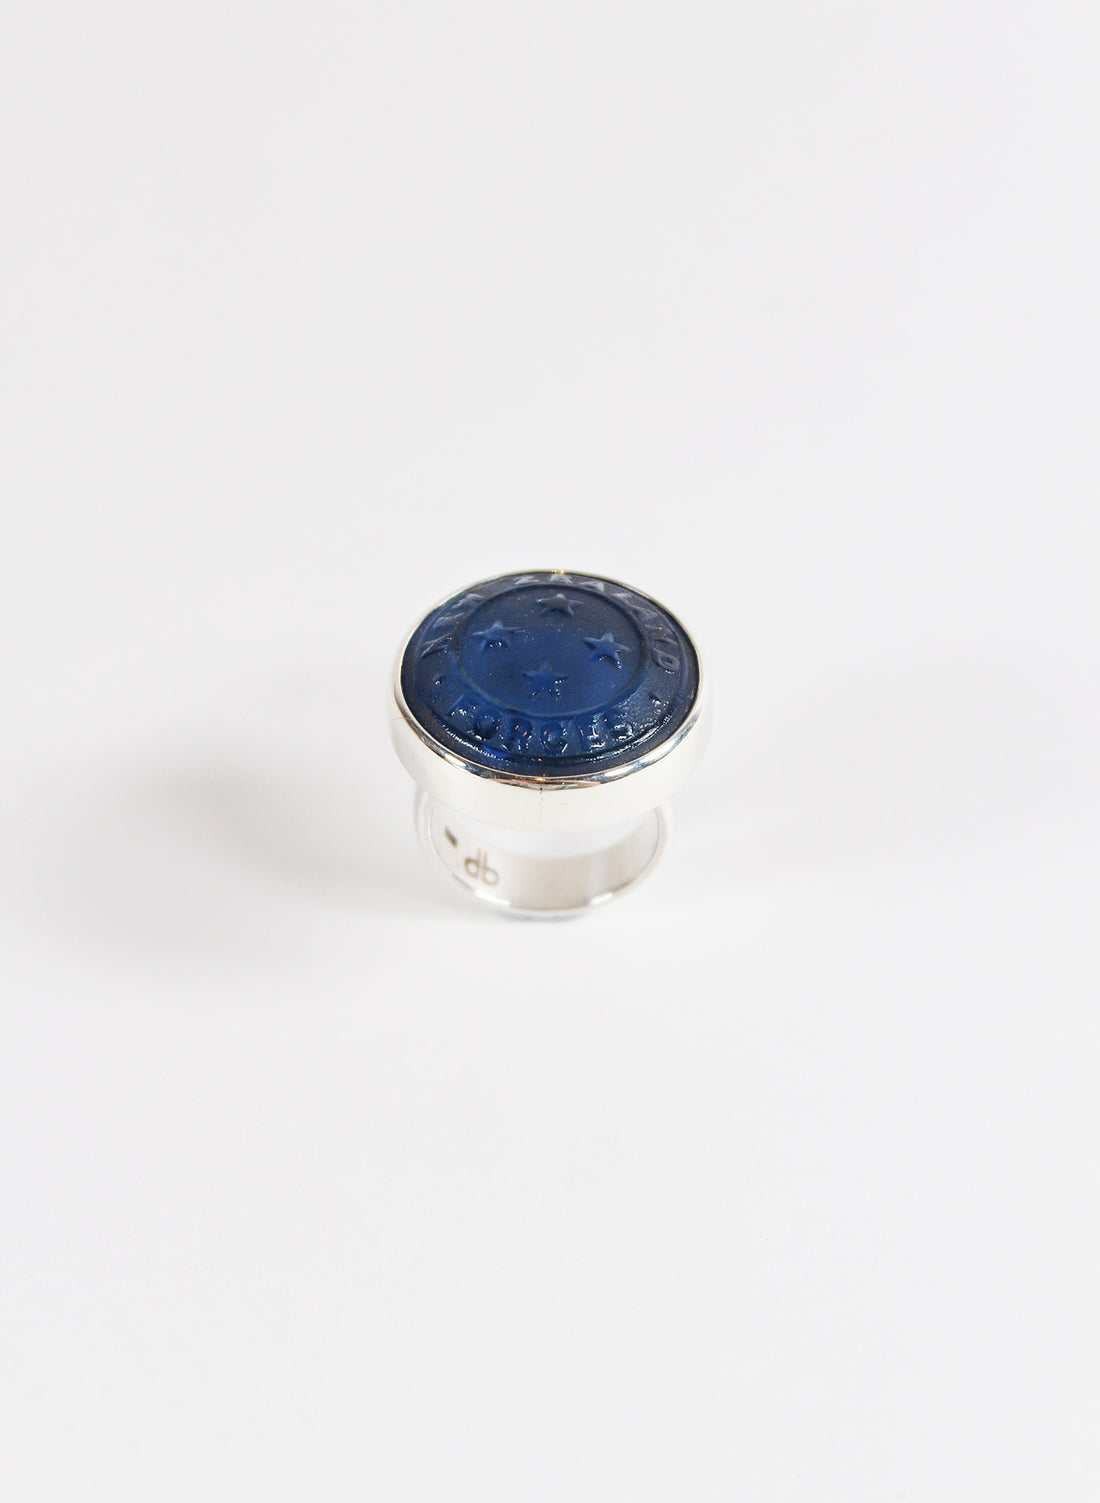 NZ Forces Signet Ring - Glass &amp; Sterling Silver Ring